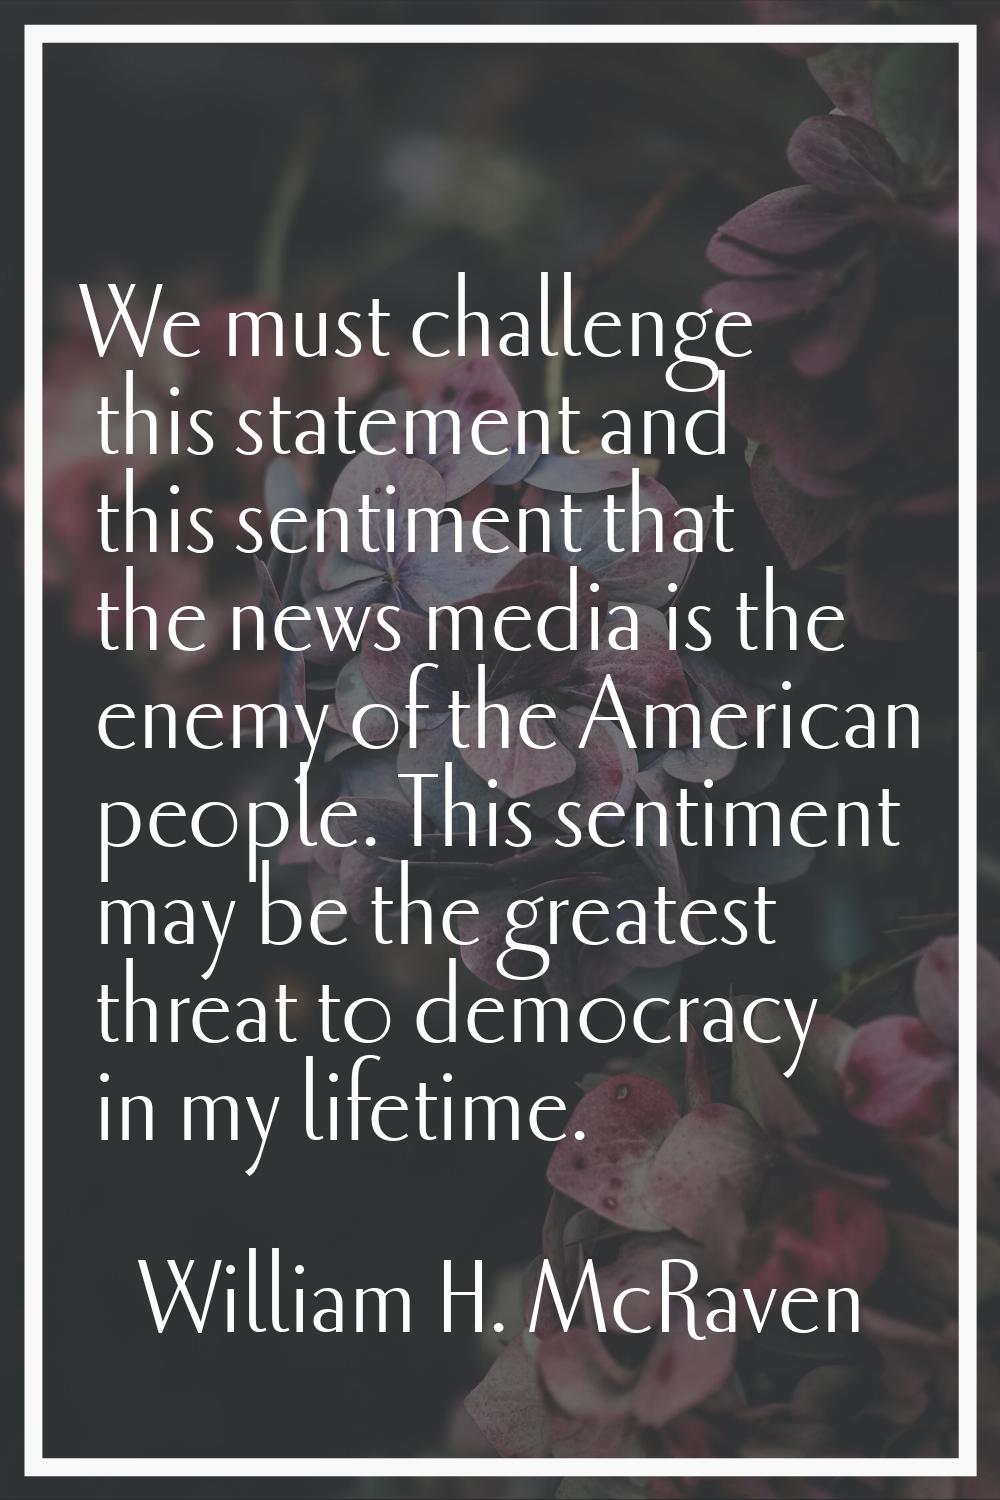 We must challenge this statement and this sentiment that the news media is the enemy of the America